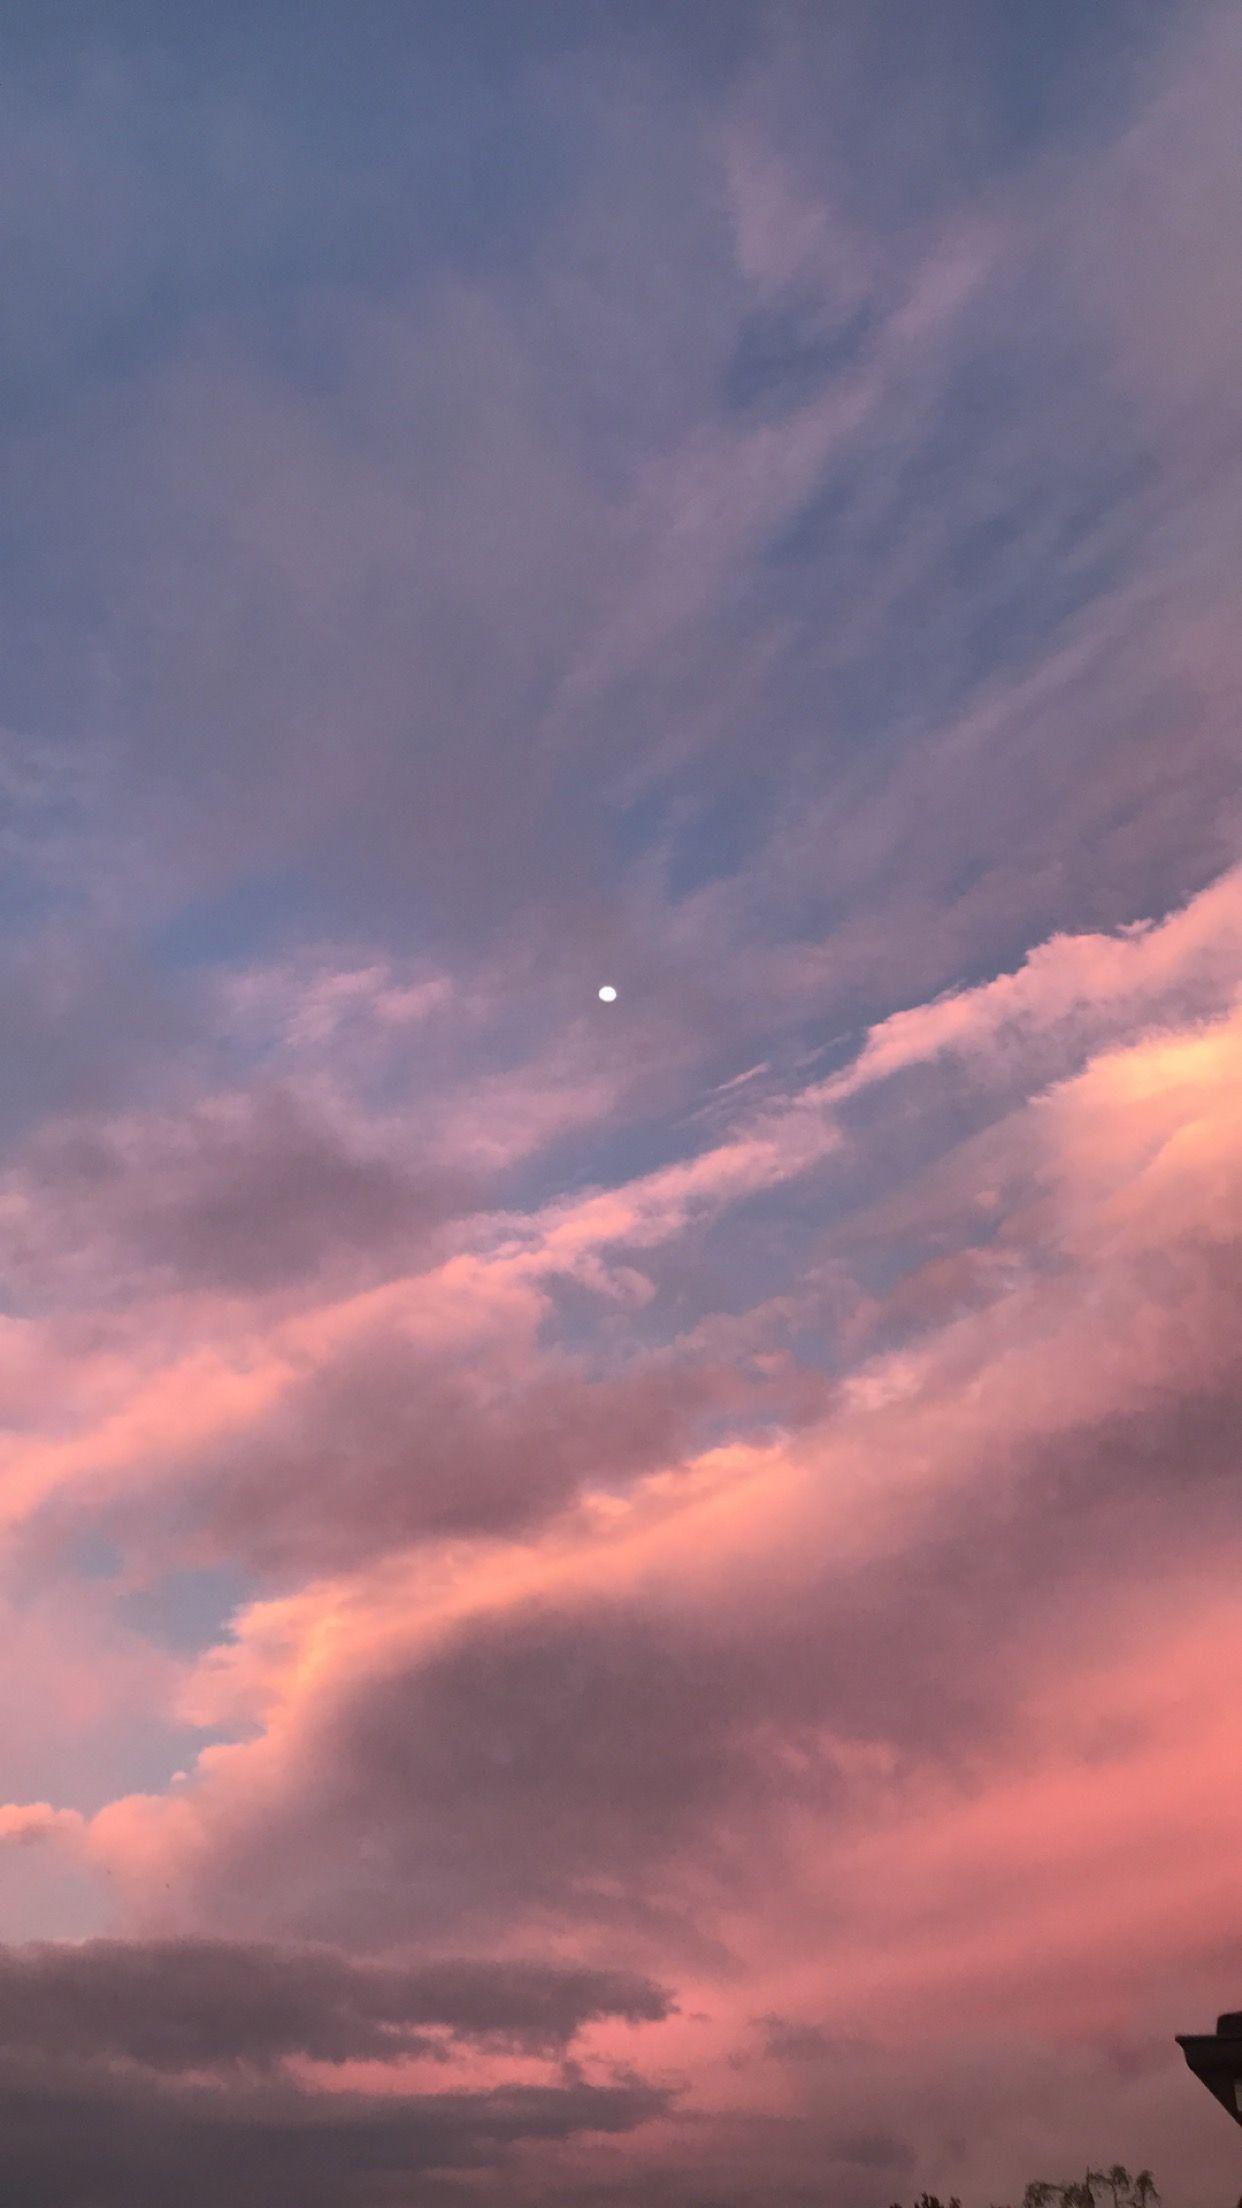 A pink and blue sky with a crescent moon. - Sky